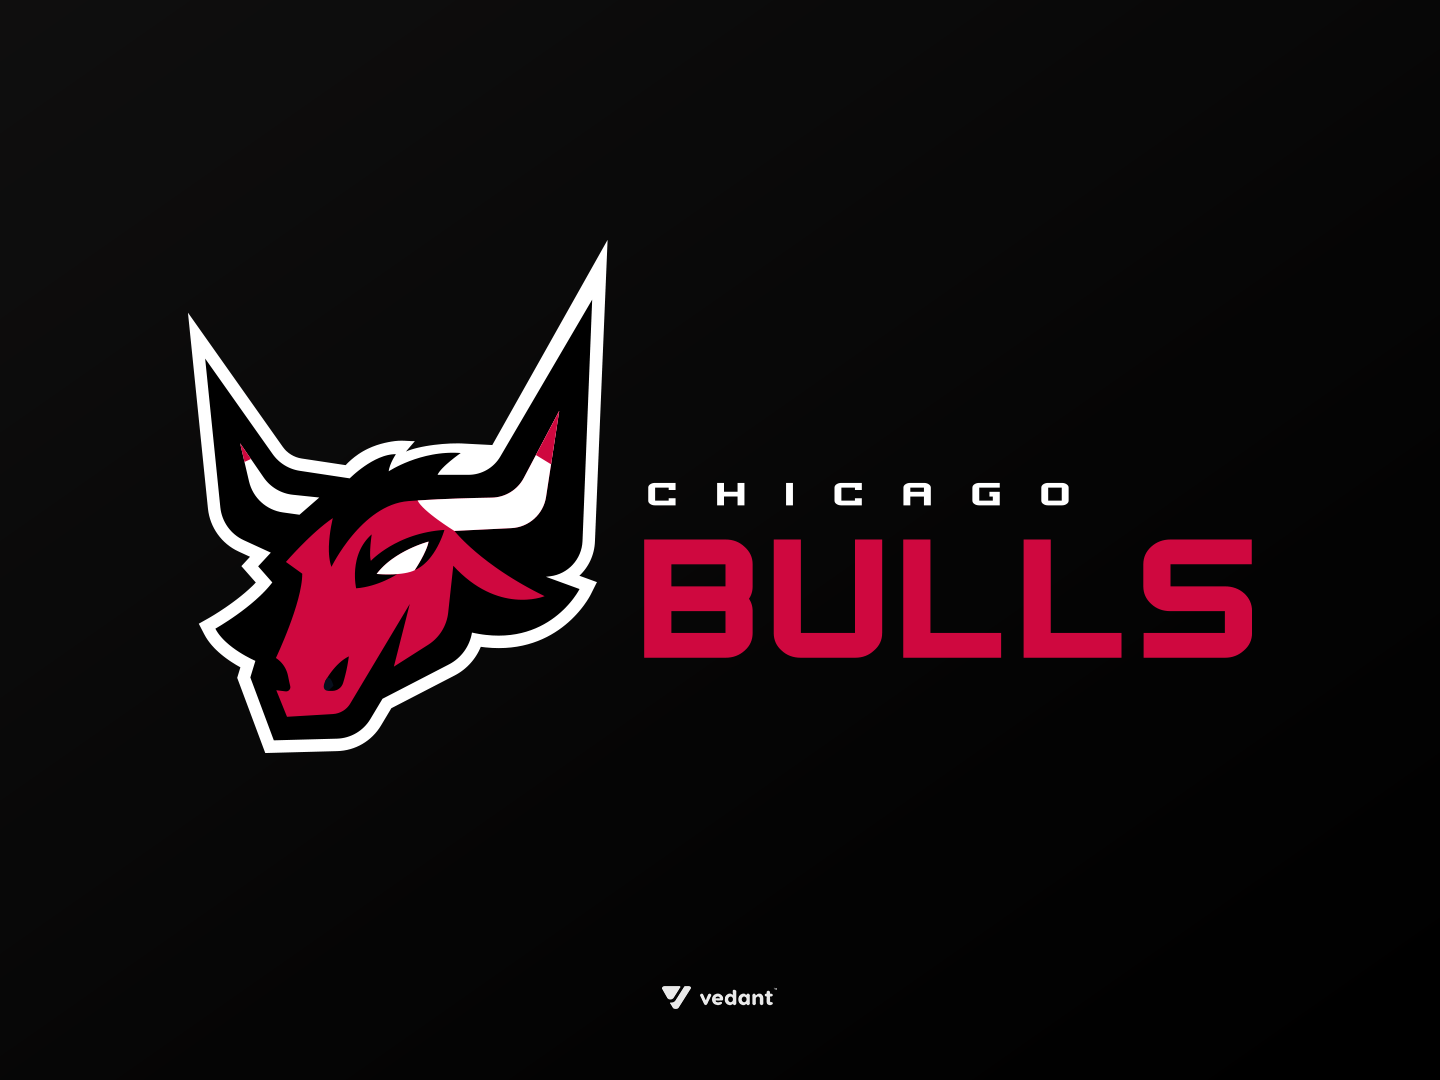 Chicago Bulls By Vedant Patel On Dribbble